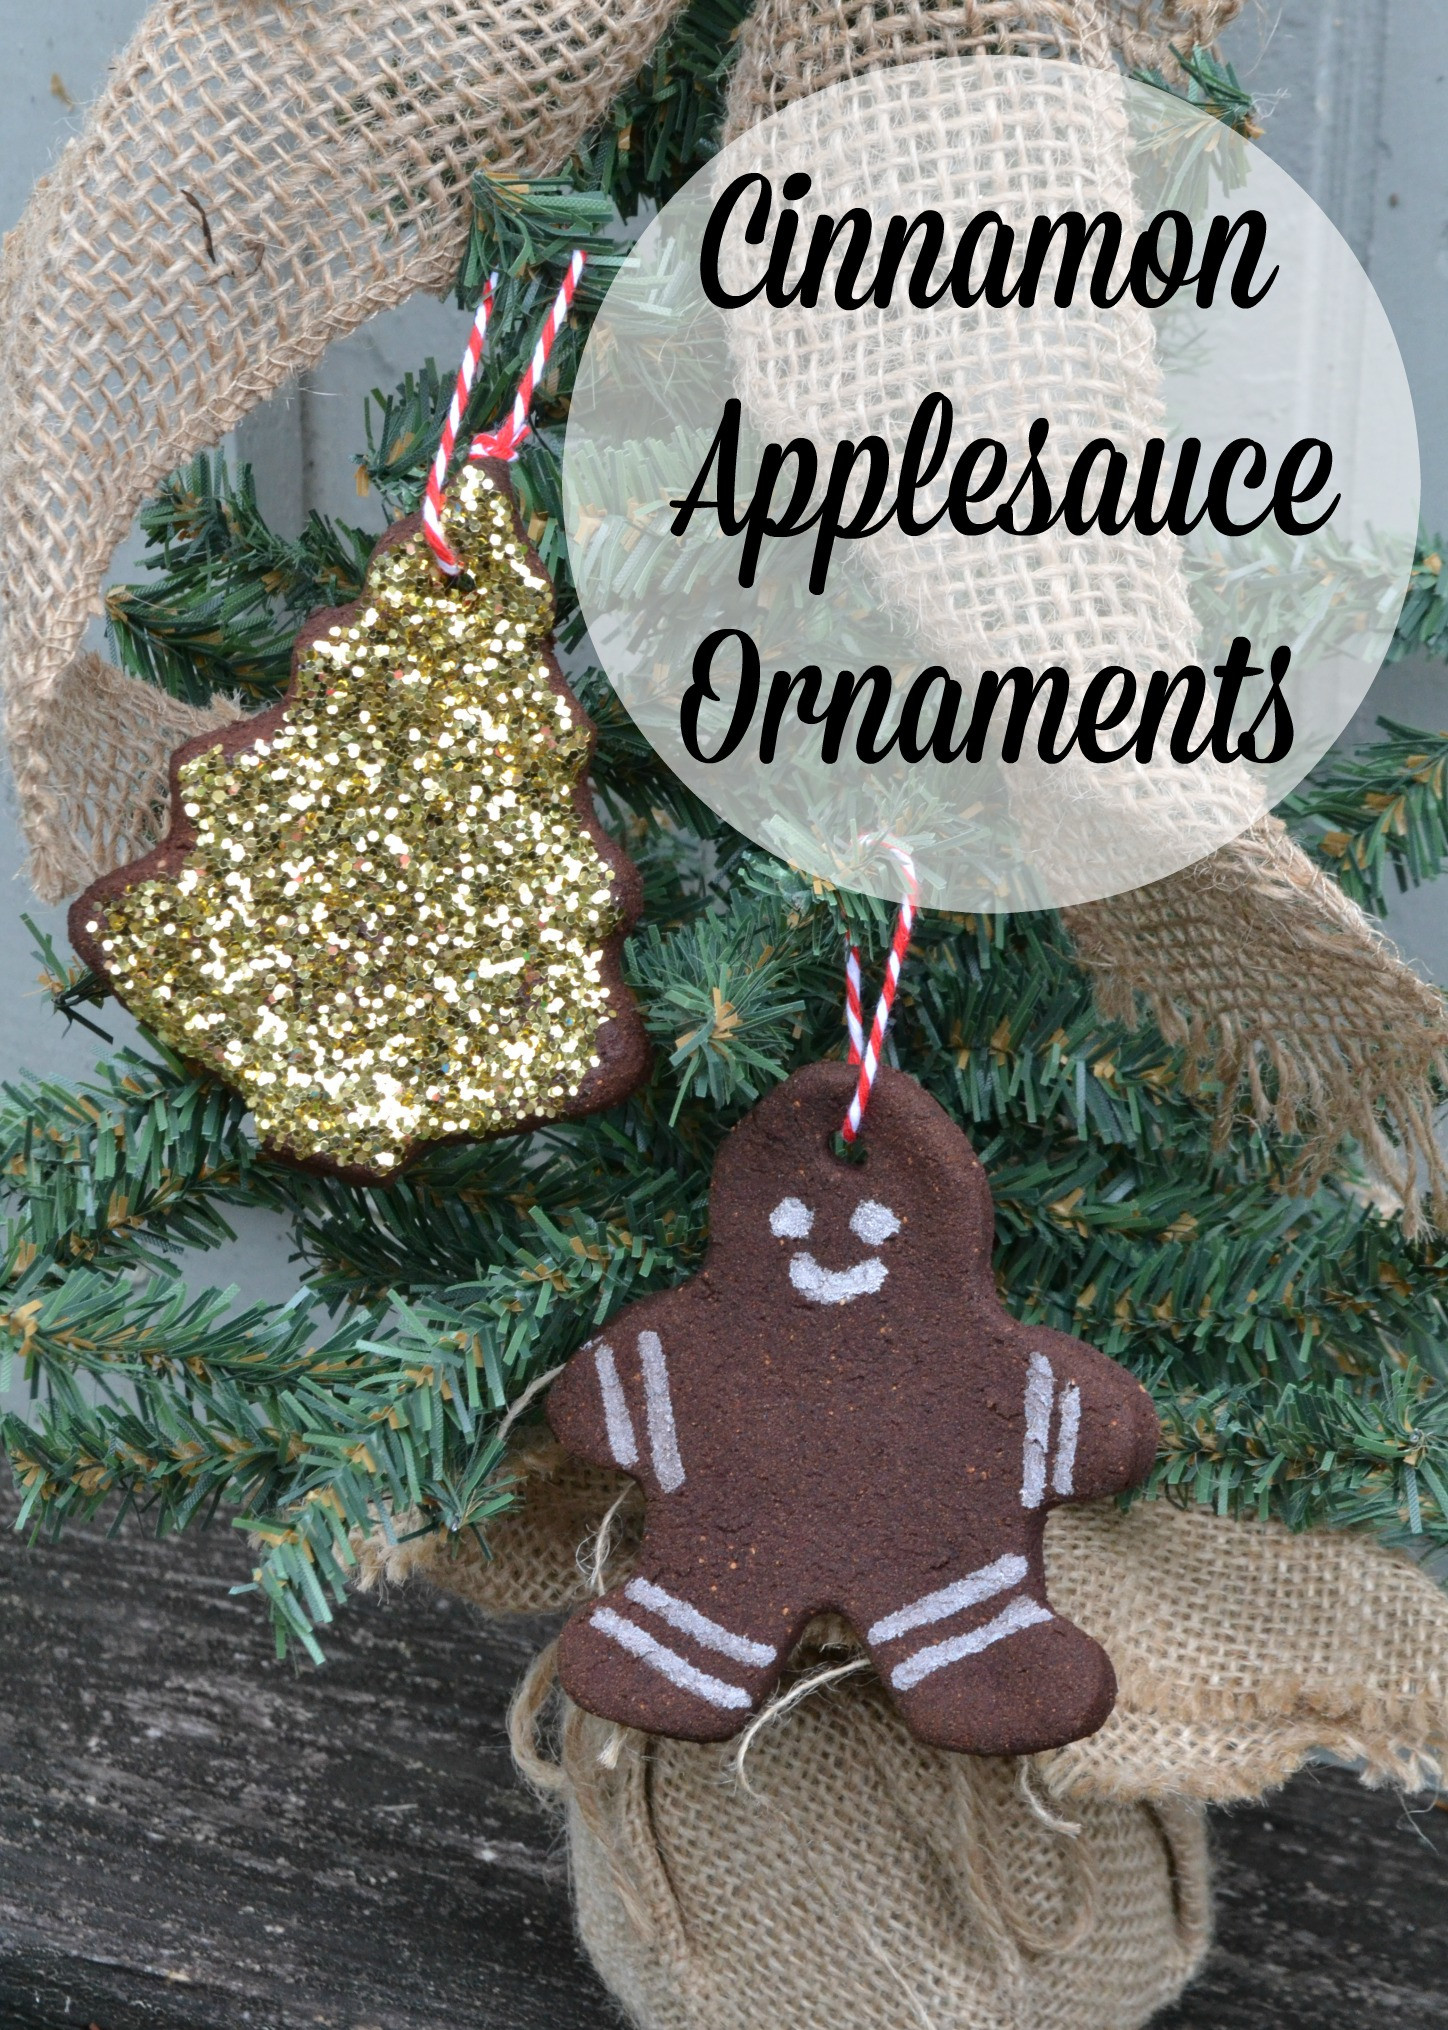 Cinnamon Applesauce Ornaments
 Cinnamon Applesauce Ornaments Moms Without Answers